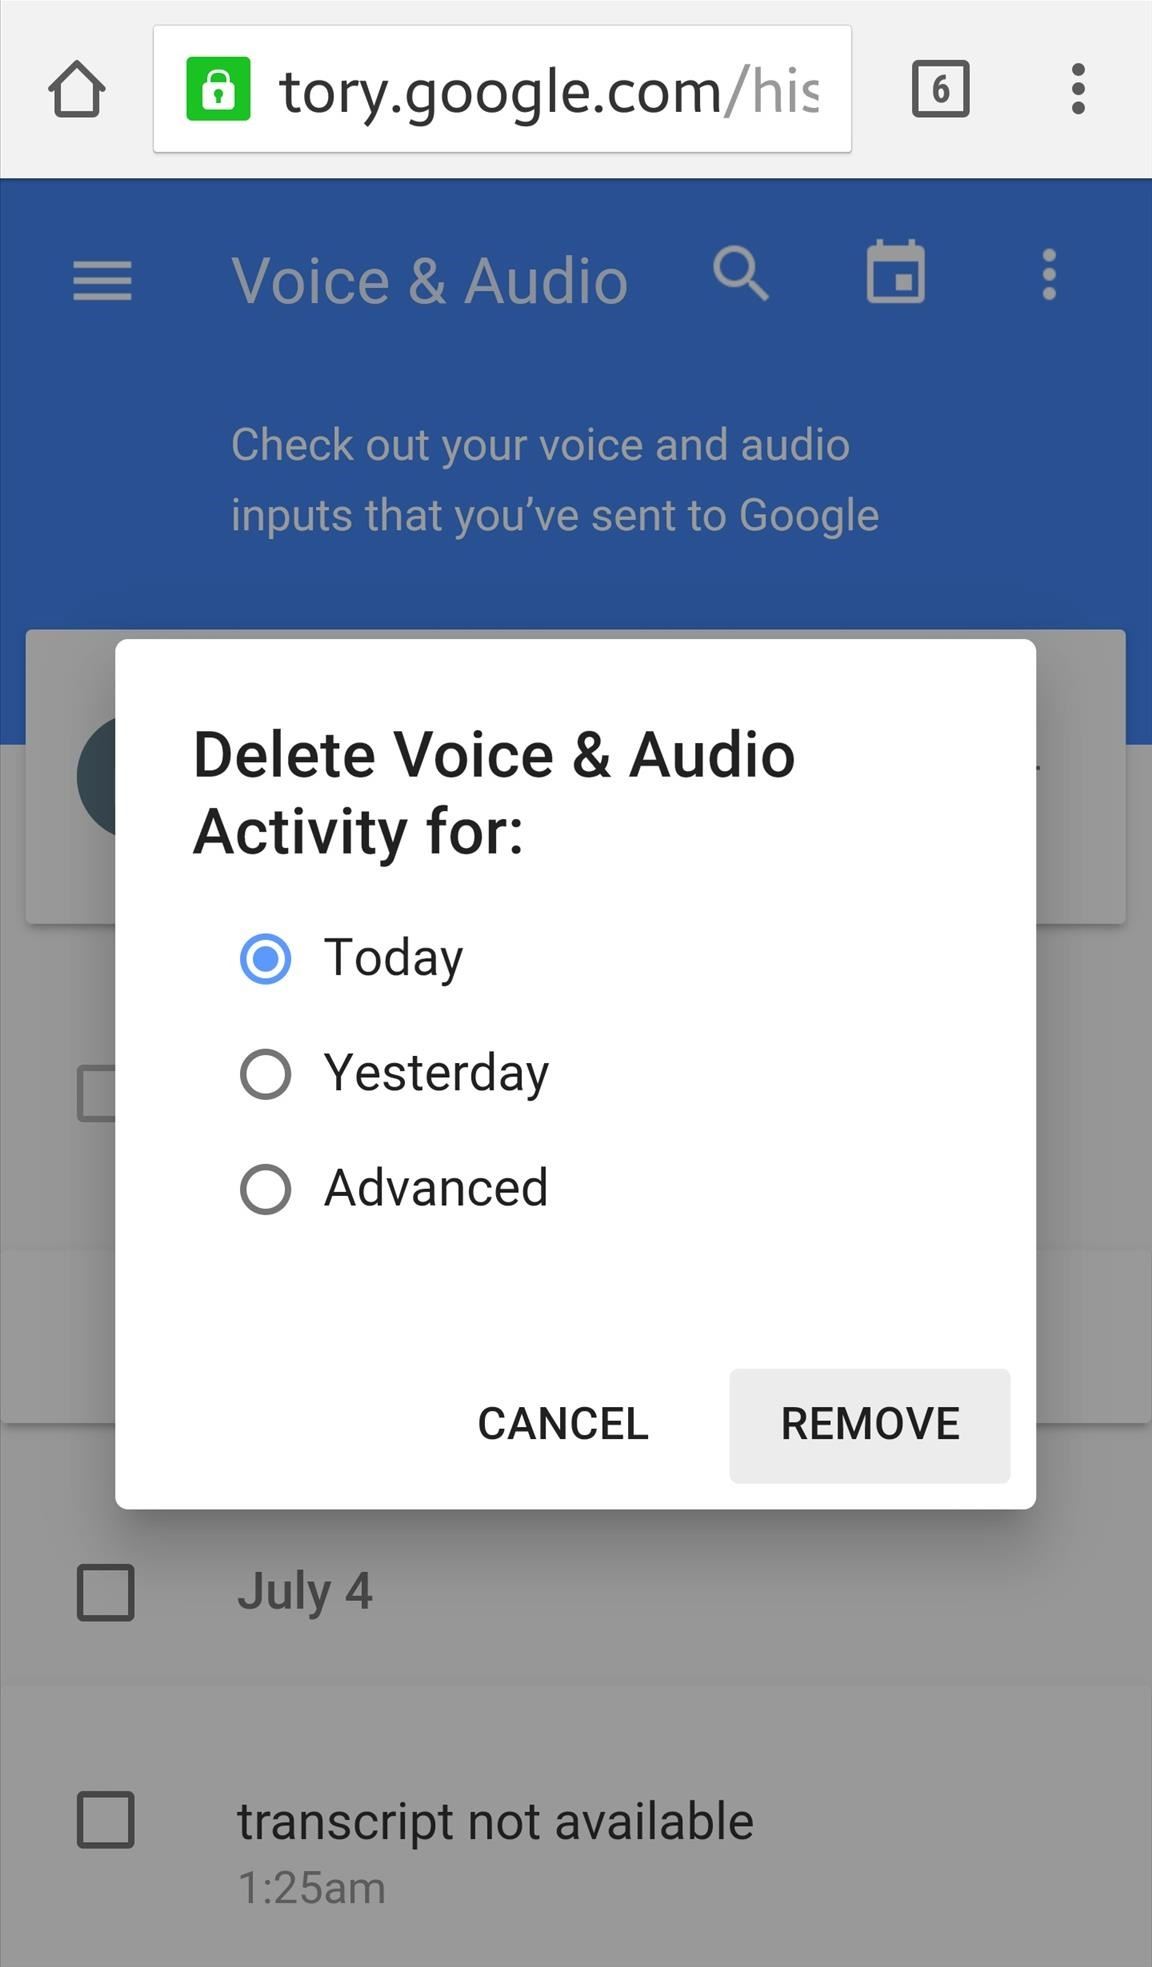 Google Stores Your Voice Search History—Here's How to Delete & Prevent It for Good